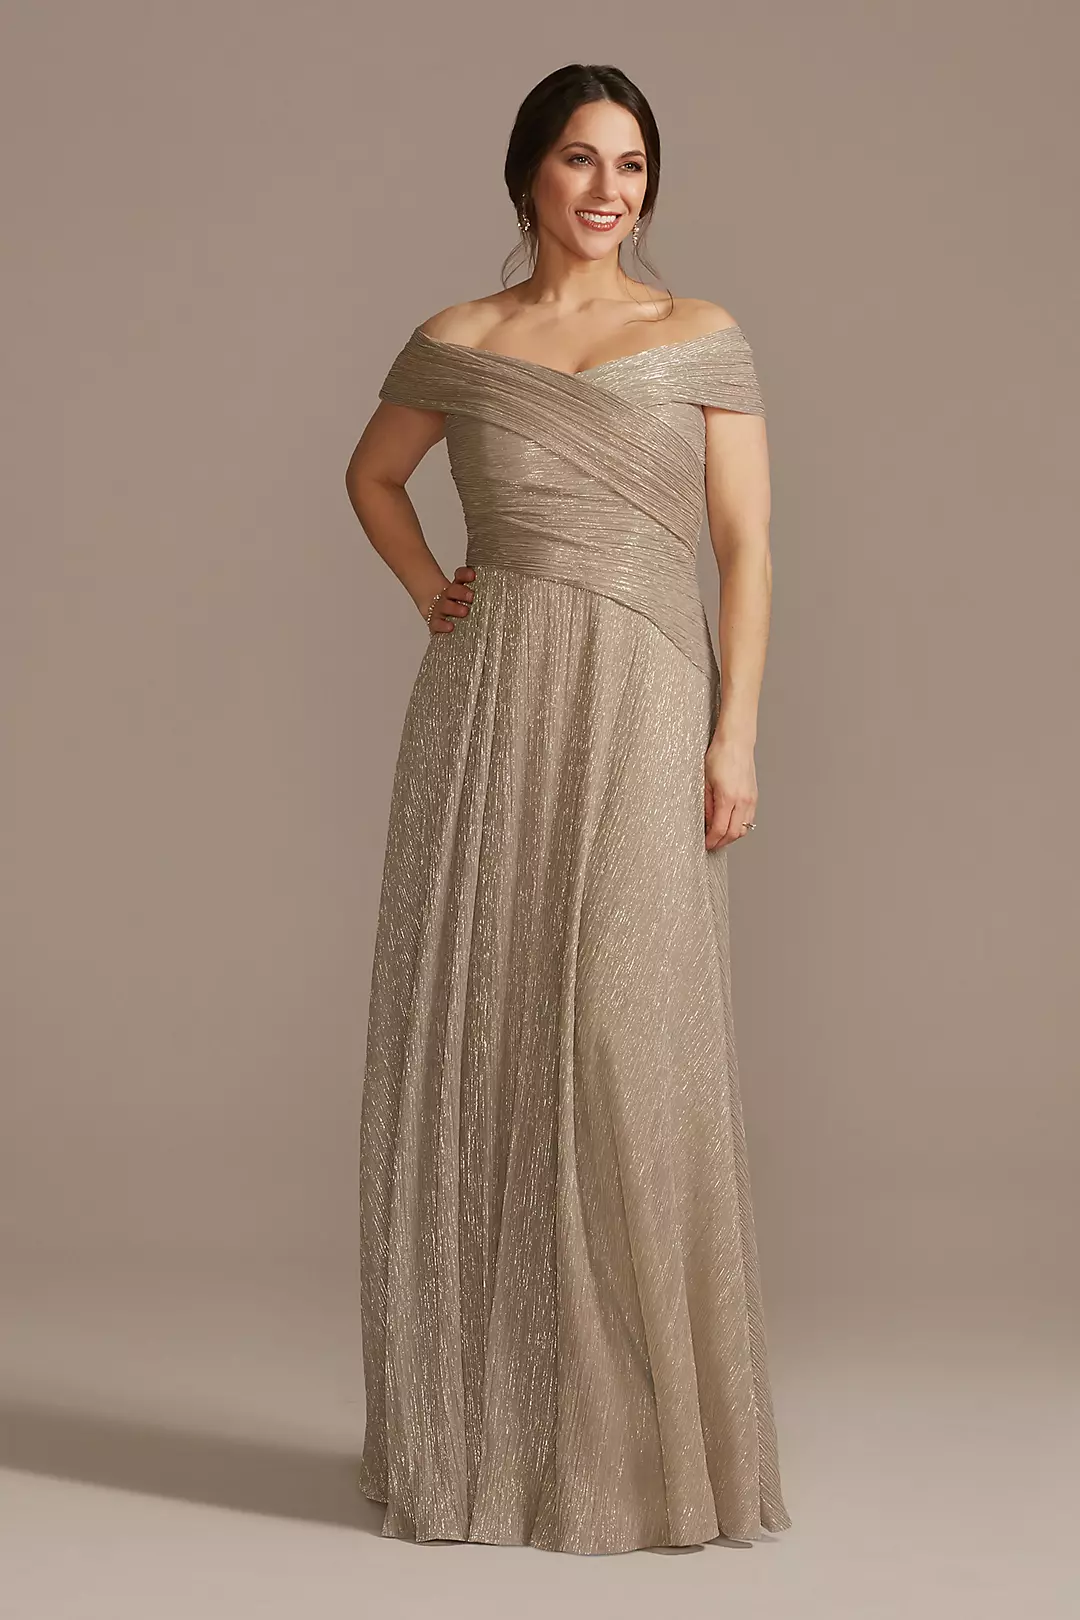 Pleated Metallic Off-the-Shoulder Dress Image